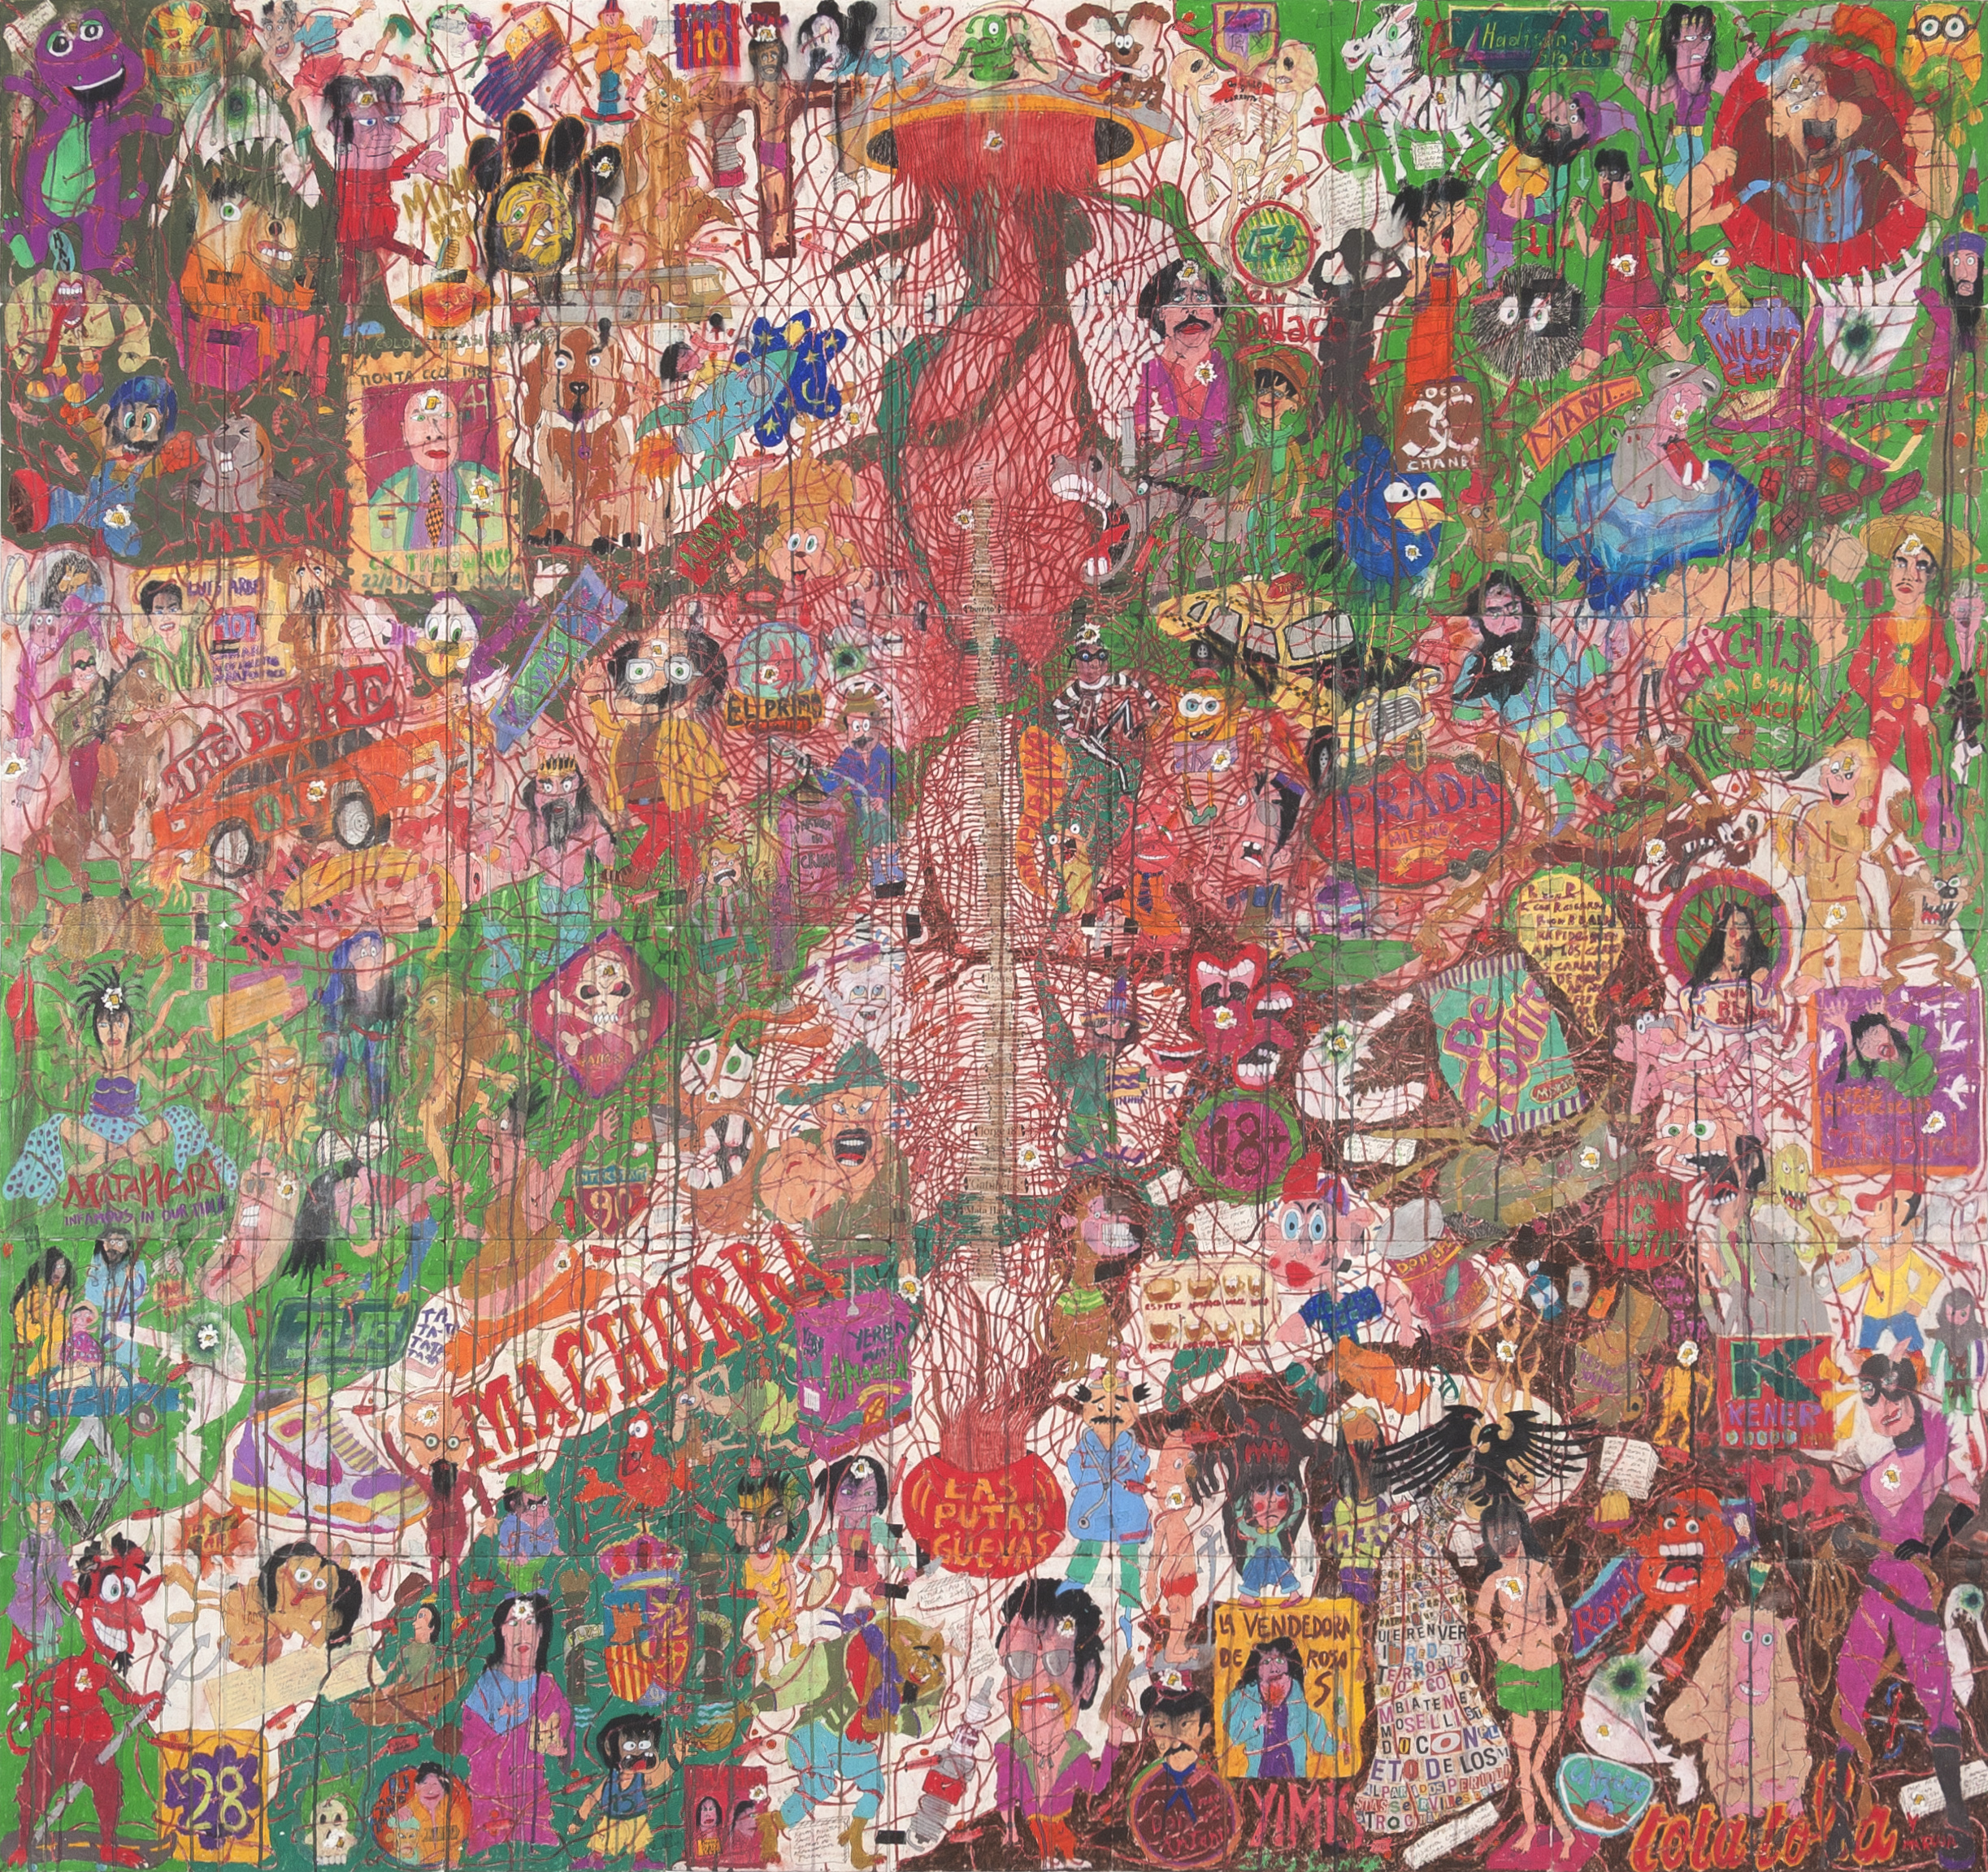 Camilo Restrepo. <em>A Land Reform 9</em>, 2016. Ink, water-soluble wax pastel, tape, stickers, newspaper clippings, glue and saliva on paper, 70 x 74 1/2 inches  (177.8 x 189.2 cm)